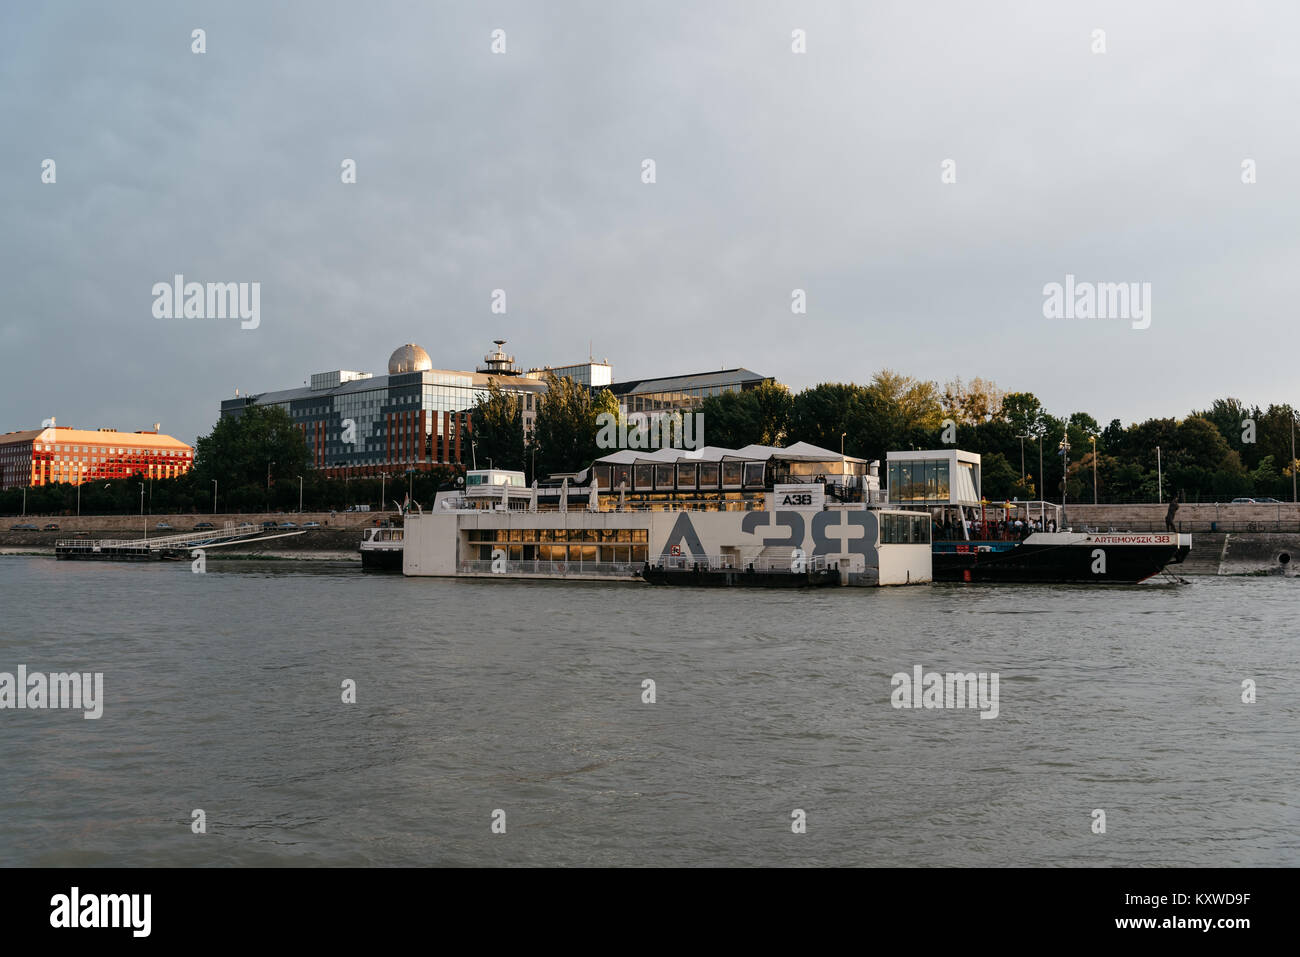 Budapest, Hungary - August 12, 2017: Multipurpose cultural hub on reconstructed Ukranian ship floating on Danube river, for live music, restaurant and Stock Photo